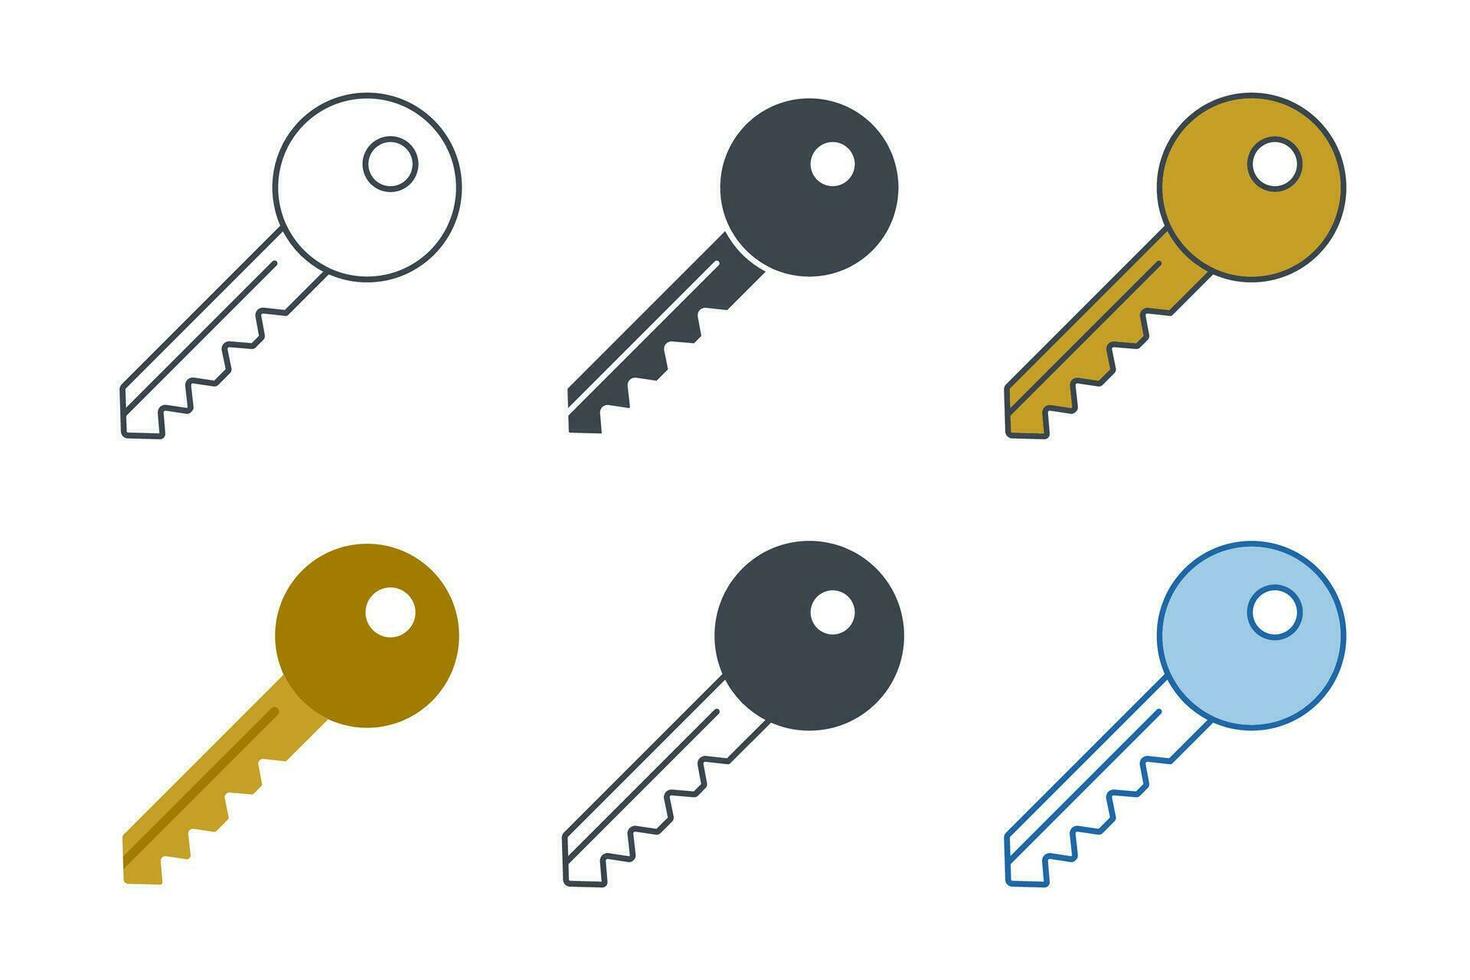 Key icon collection with different styles. Key icon symbol vector illustration isolated on white background